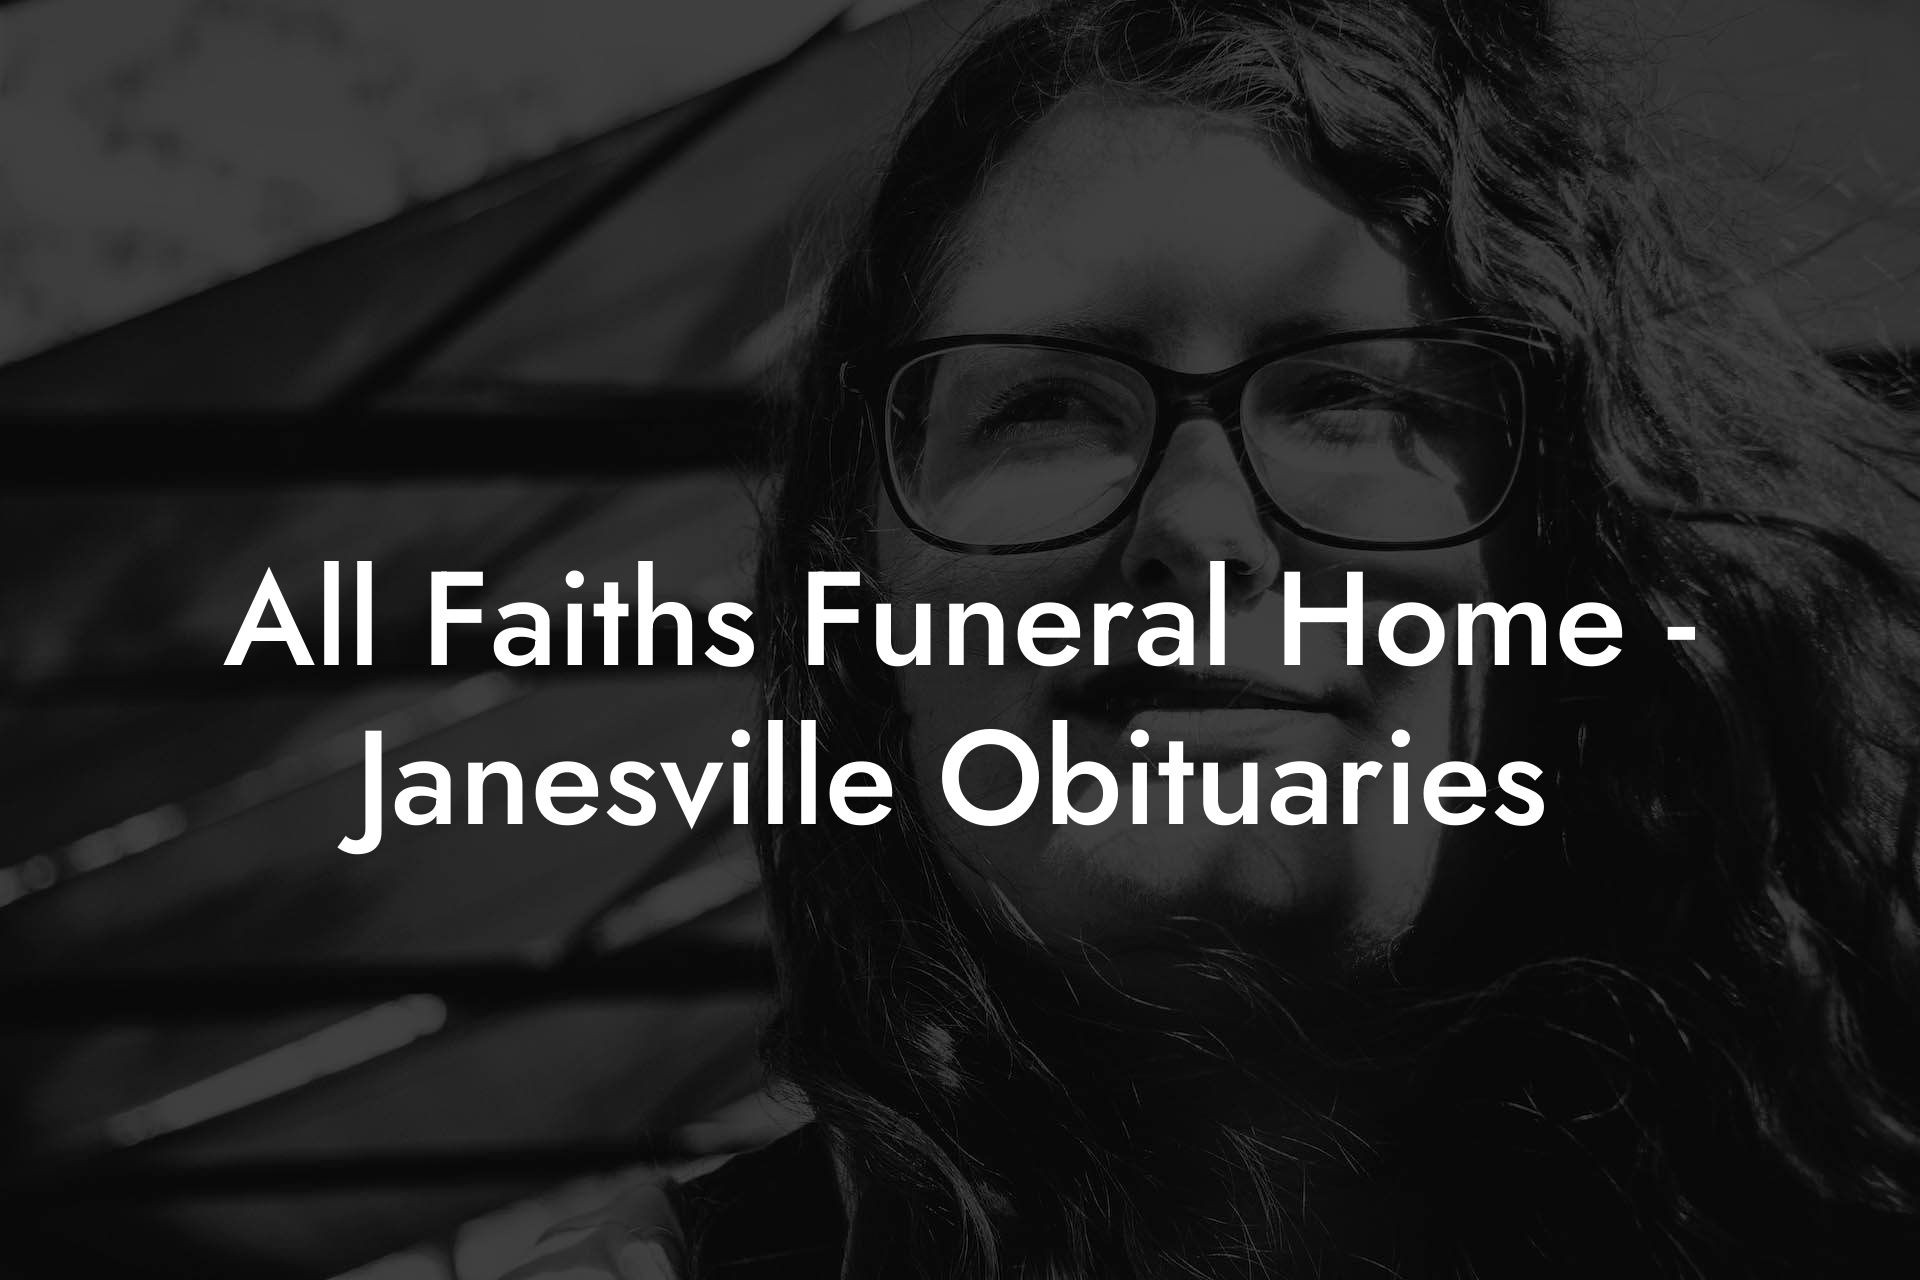 All Faiths Funeral Home - Janesville Obituaries